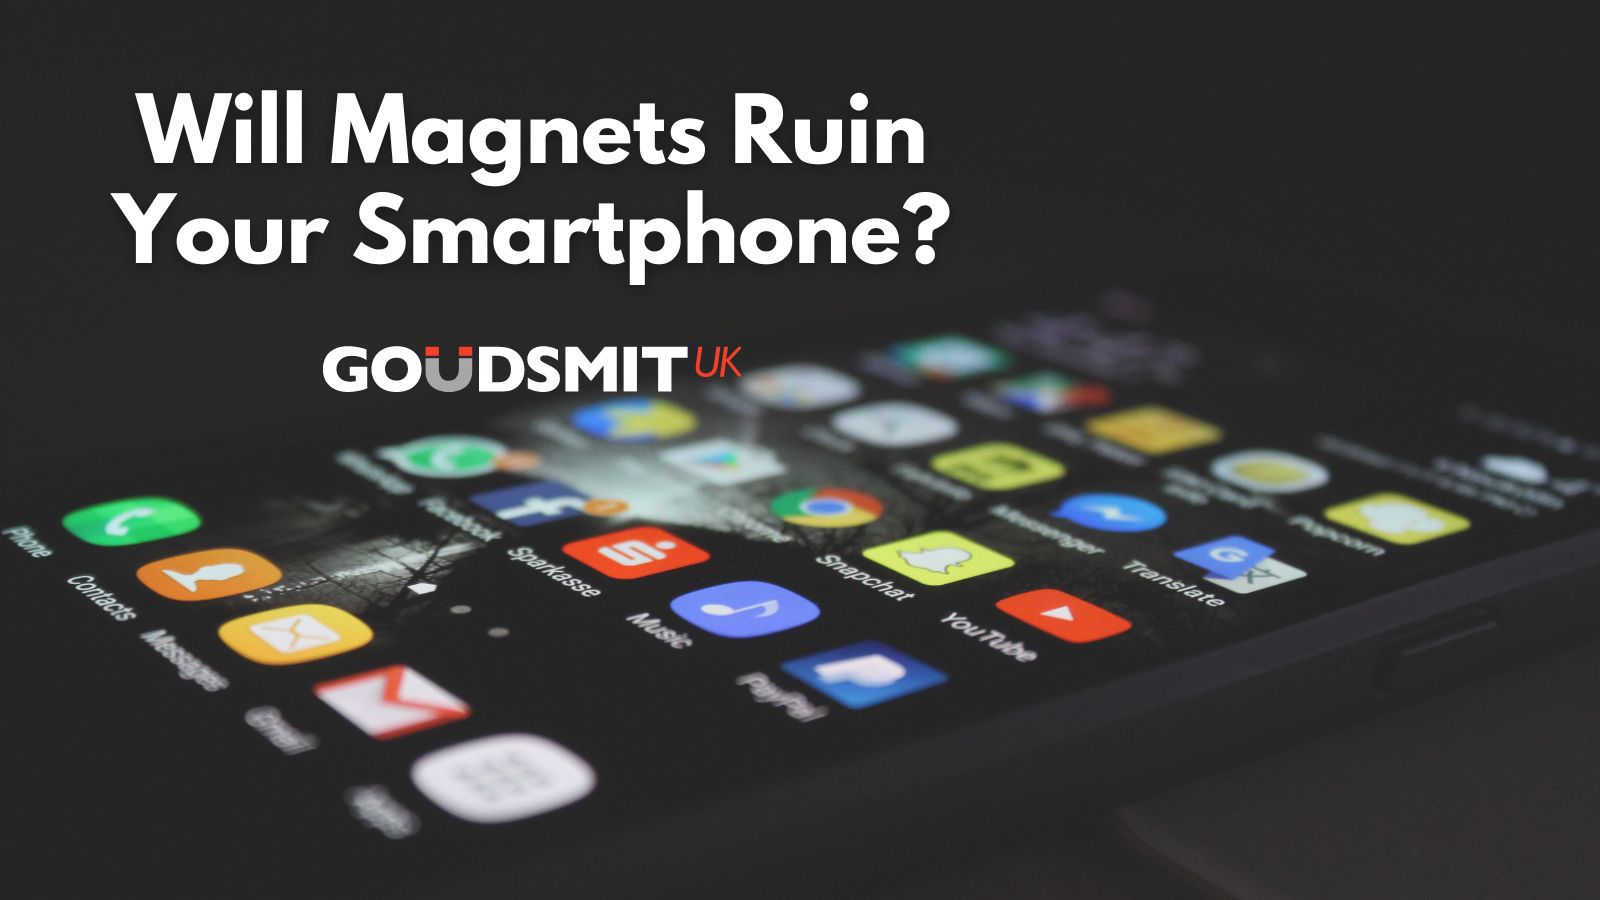 Will A Magnet Damage My Phone? - FIRST4MAGNETS